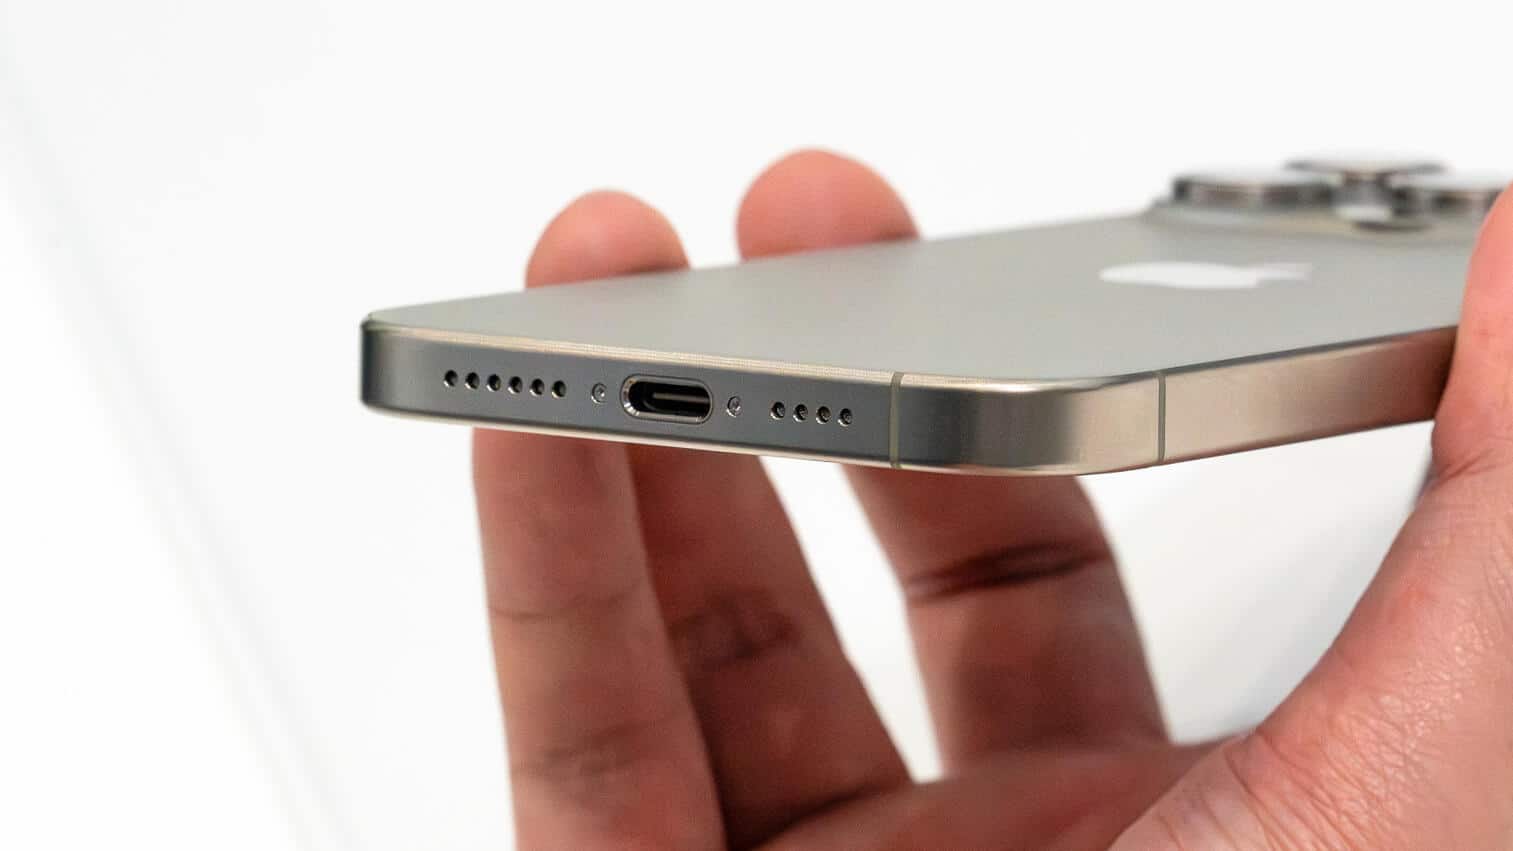 More tests: USB-C did not increase the charging power of iPhone 15 devices